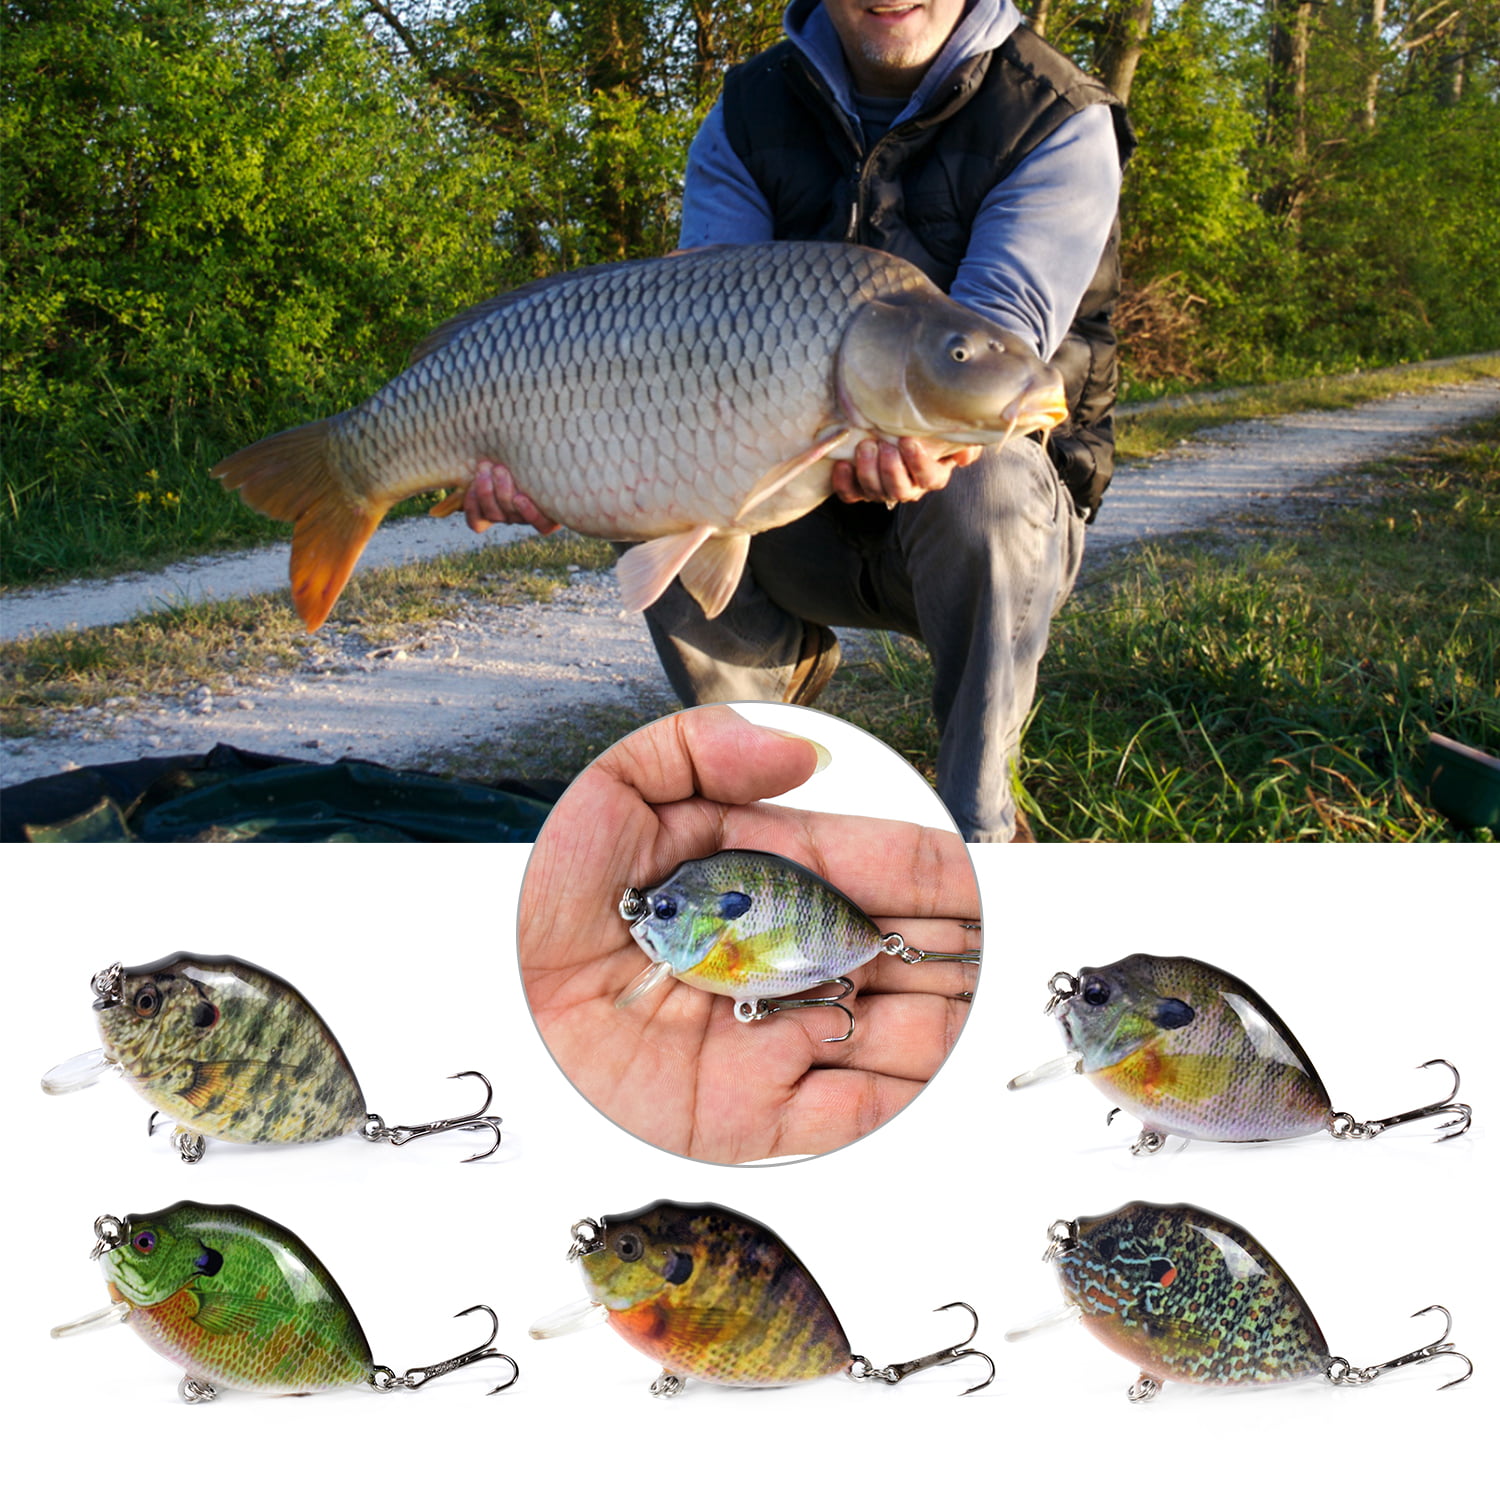 MIXFEER 5PCS Fishing Lures 6cm 15g Mini Wobbler Fishing Lure Artificial  Hard Bait Crankbait with Tackle Box for Fish Bass Fishing Tackle